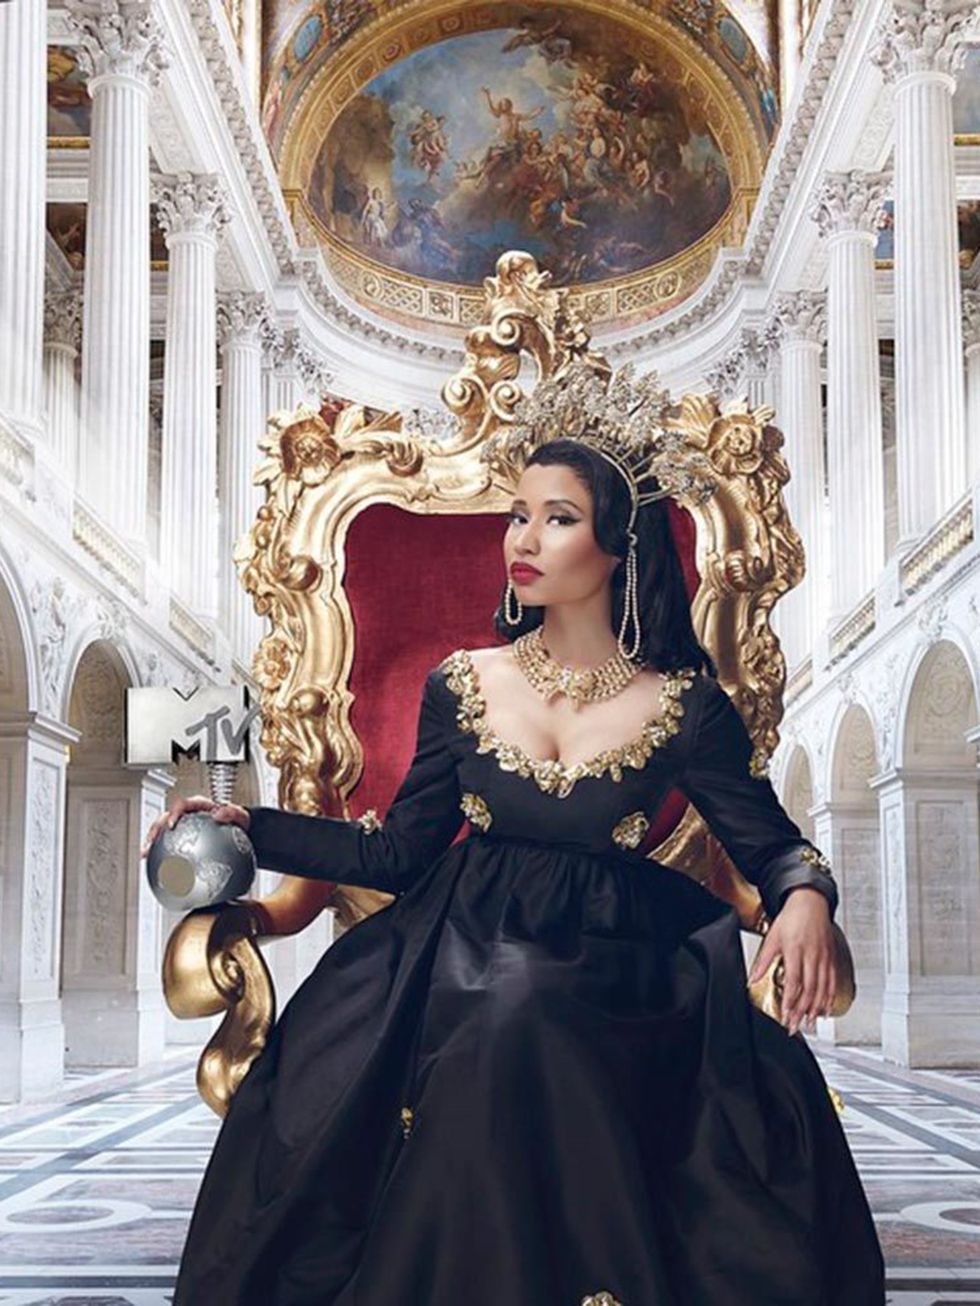 Nicki Minaj
(@Nickiminaj)

'So excited to announce that I will not only perform, but I have the honorable task of HOSTING this year's MTV European Music Awards!!!!!!! AAAAAHHHHHHH!!!!!!!!!!! The show will shoot in GLASGOW, SCOTLAND for its 20th Anniversar